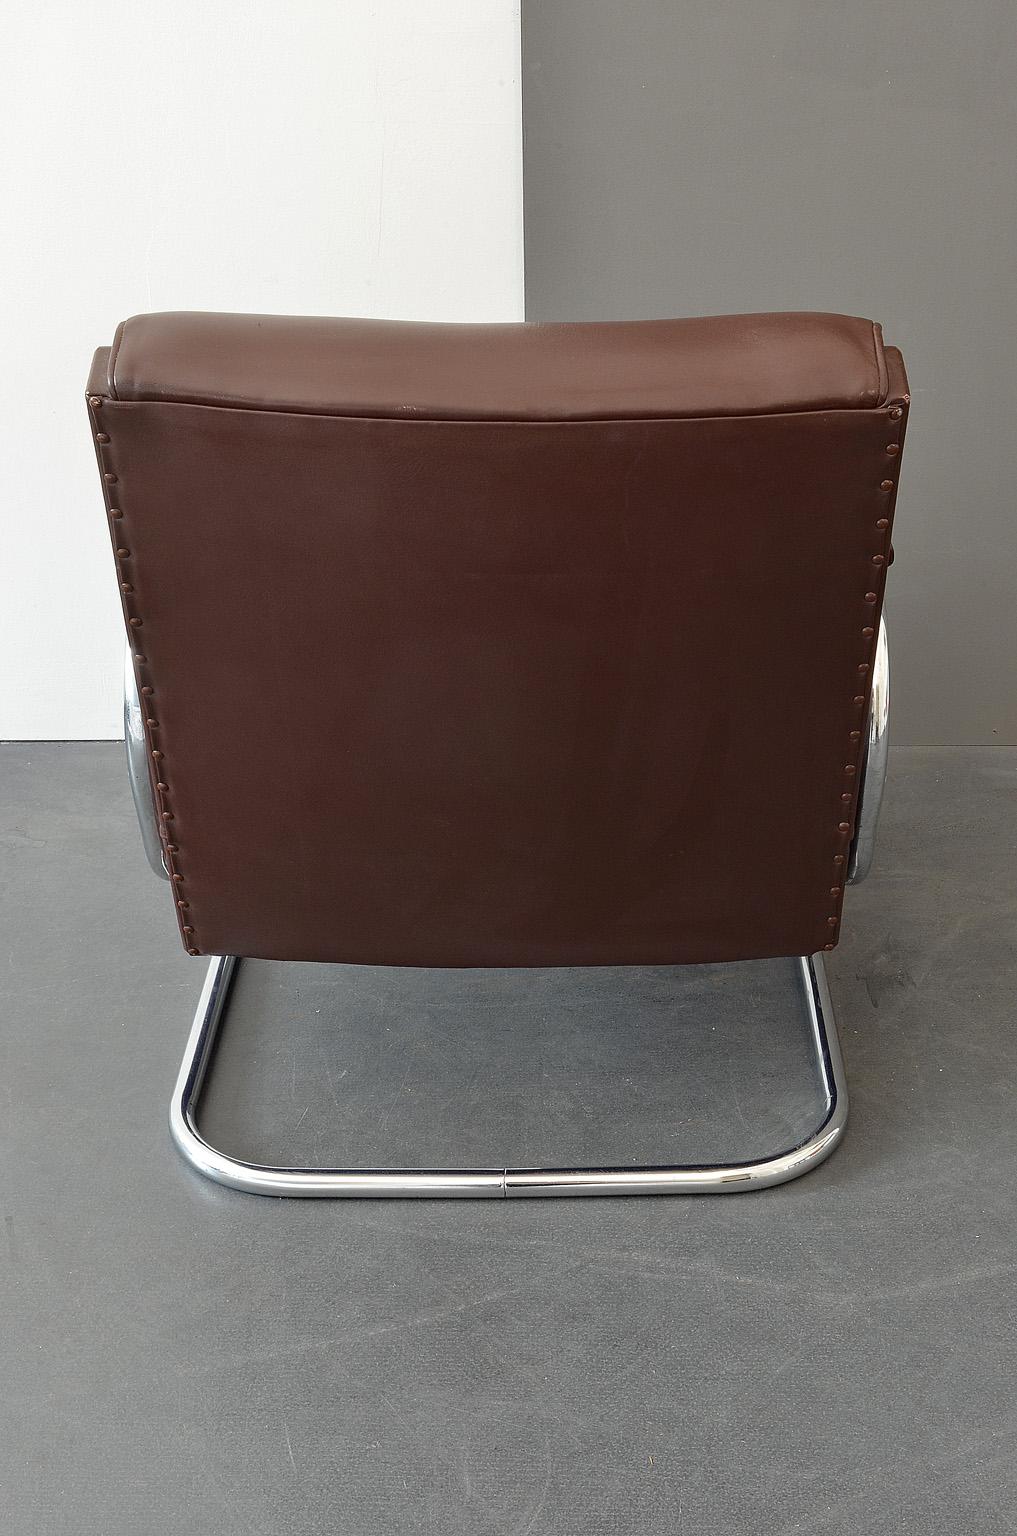 Czech Armchair or Cantilever Tubular Steel Brown Leather from Mücke Melder, 1930s For Sale